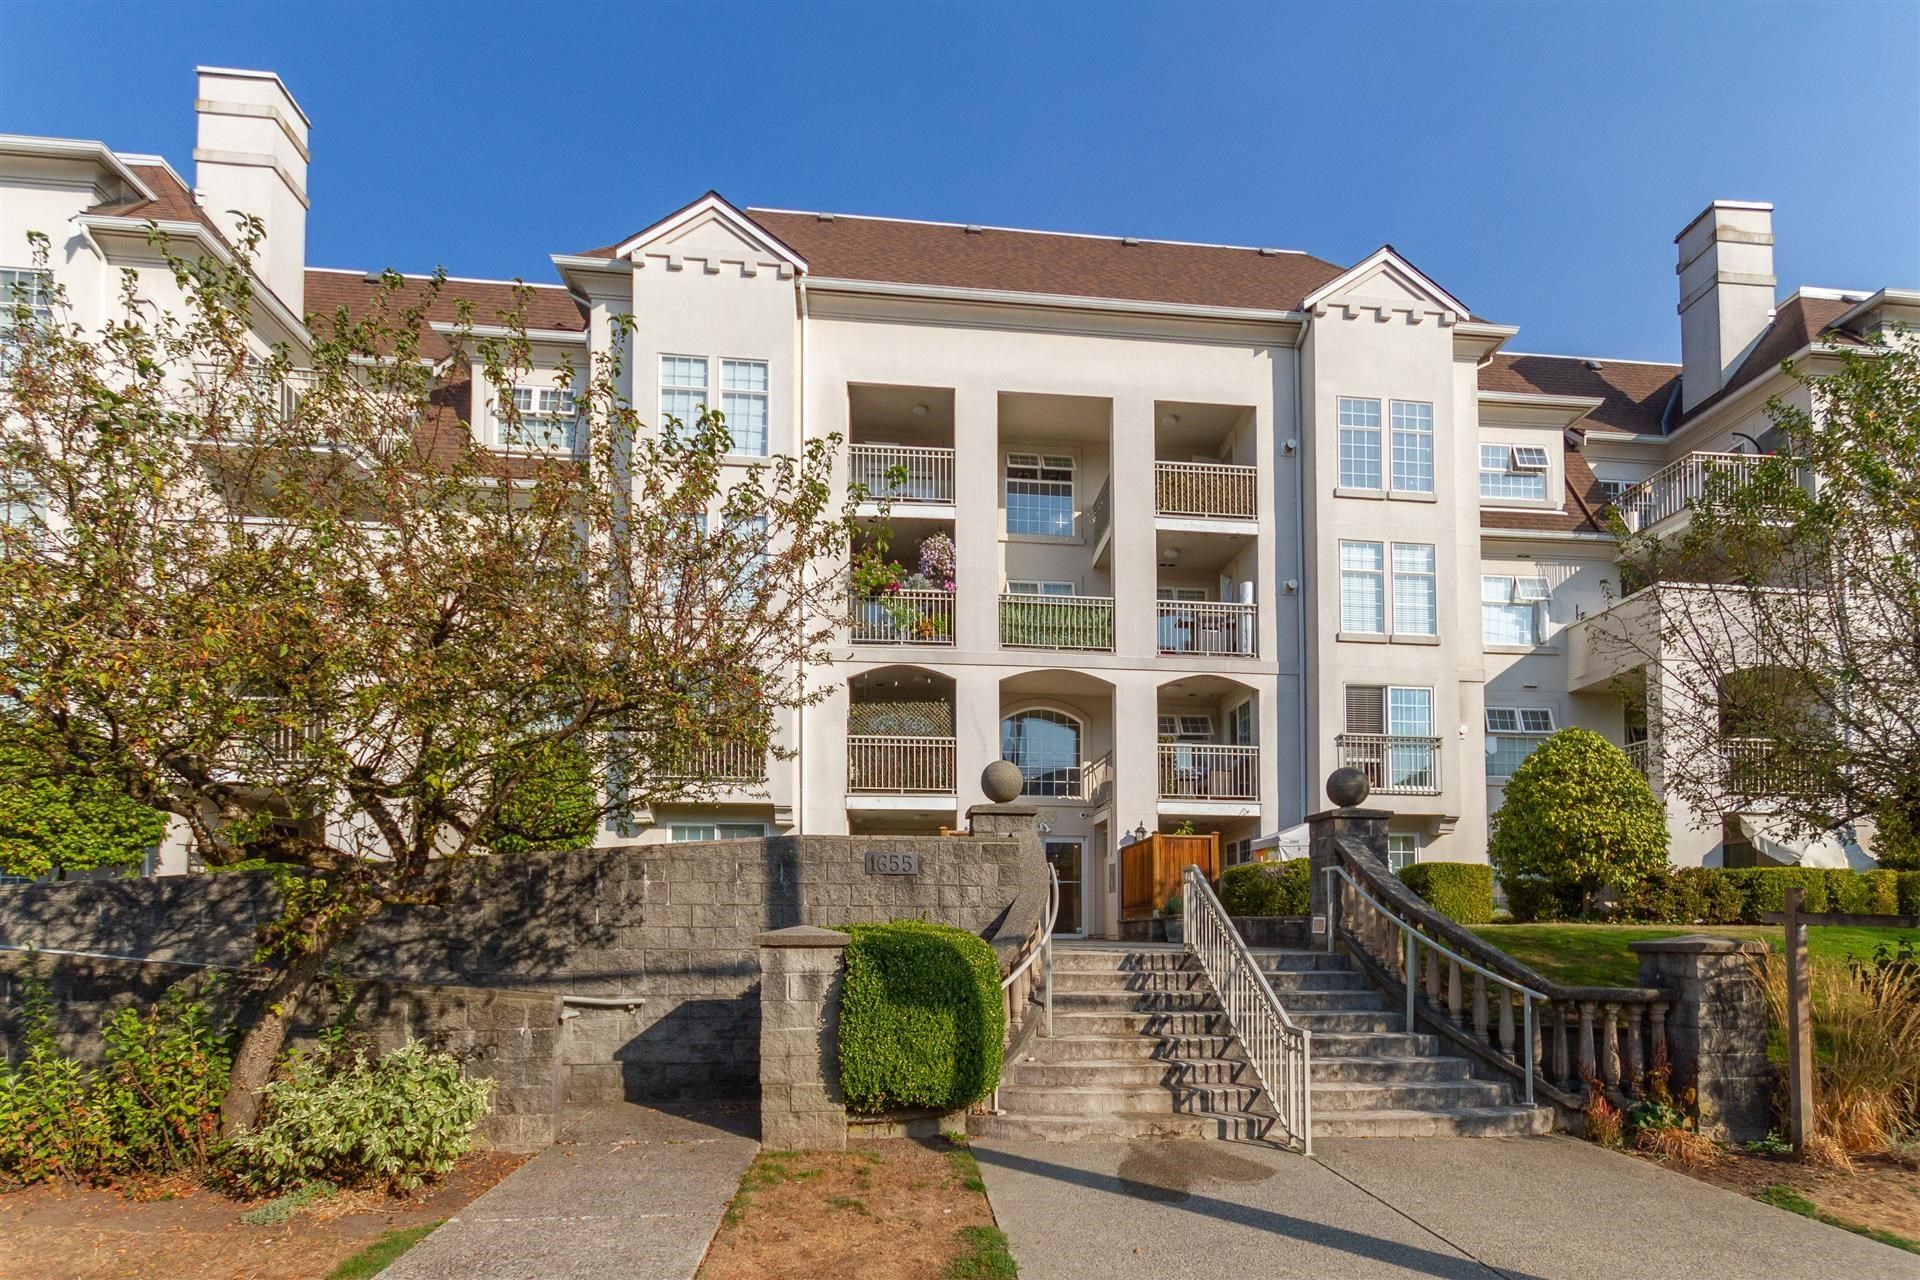 The Thornton Group has JUST SOLD ANOTHER property at 404 1655 GRANT AVE in Port Coquitlam 